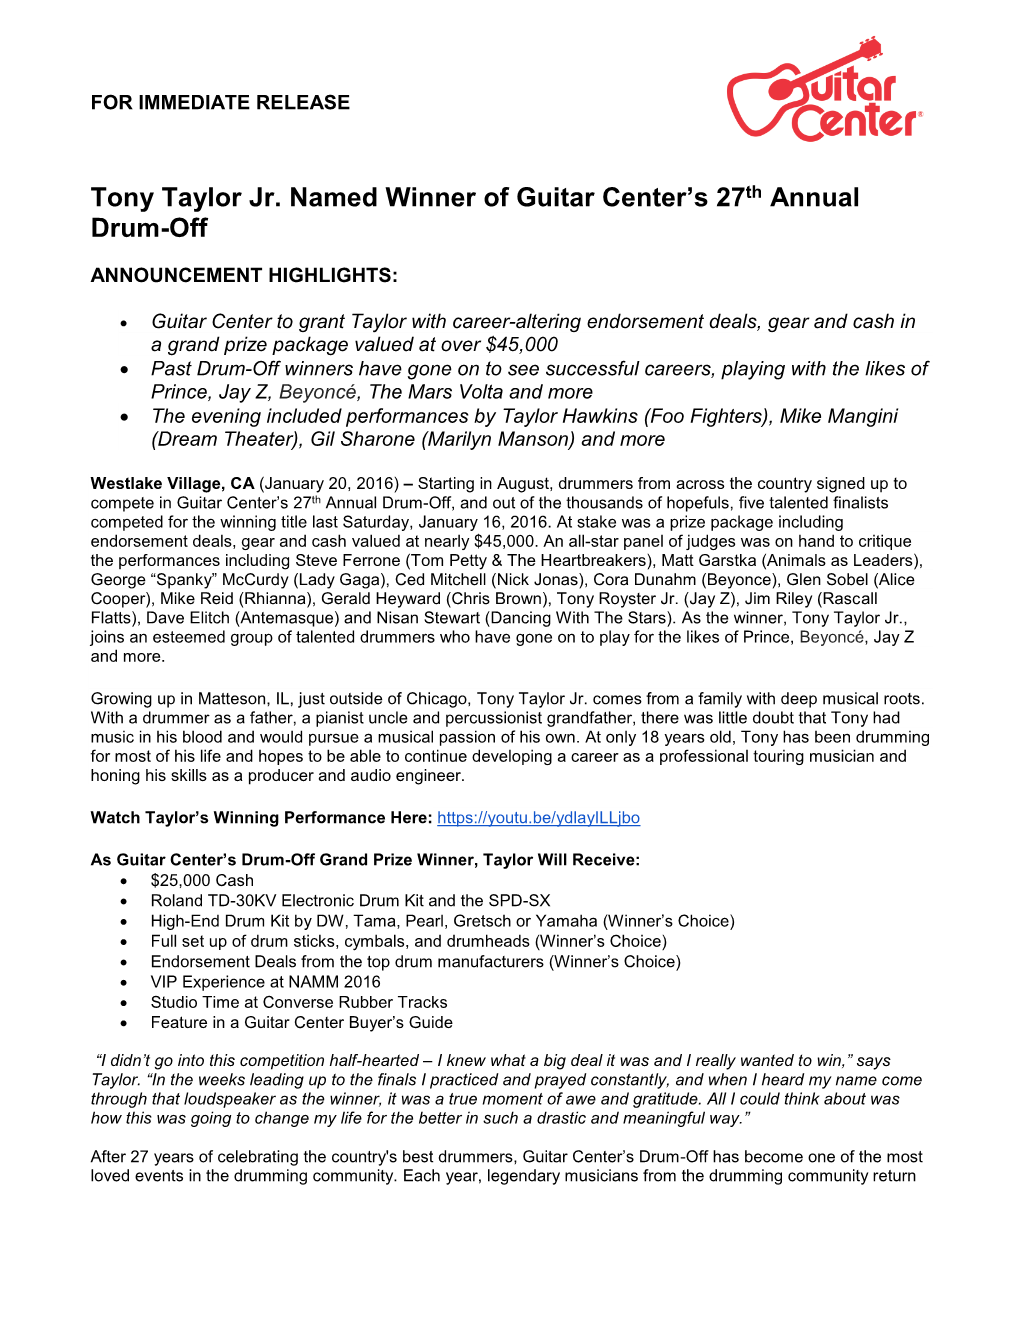 Tony Taylor Jr. Named Winner of Guitar Center's 27Th Annual Drum-Off